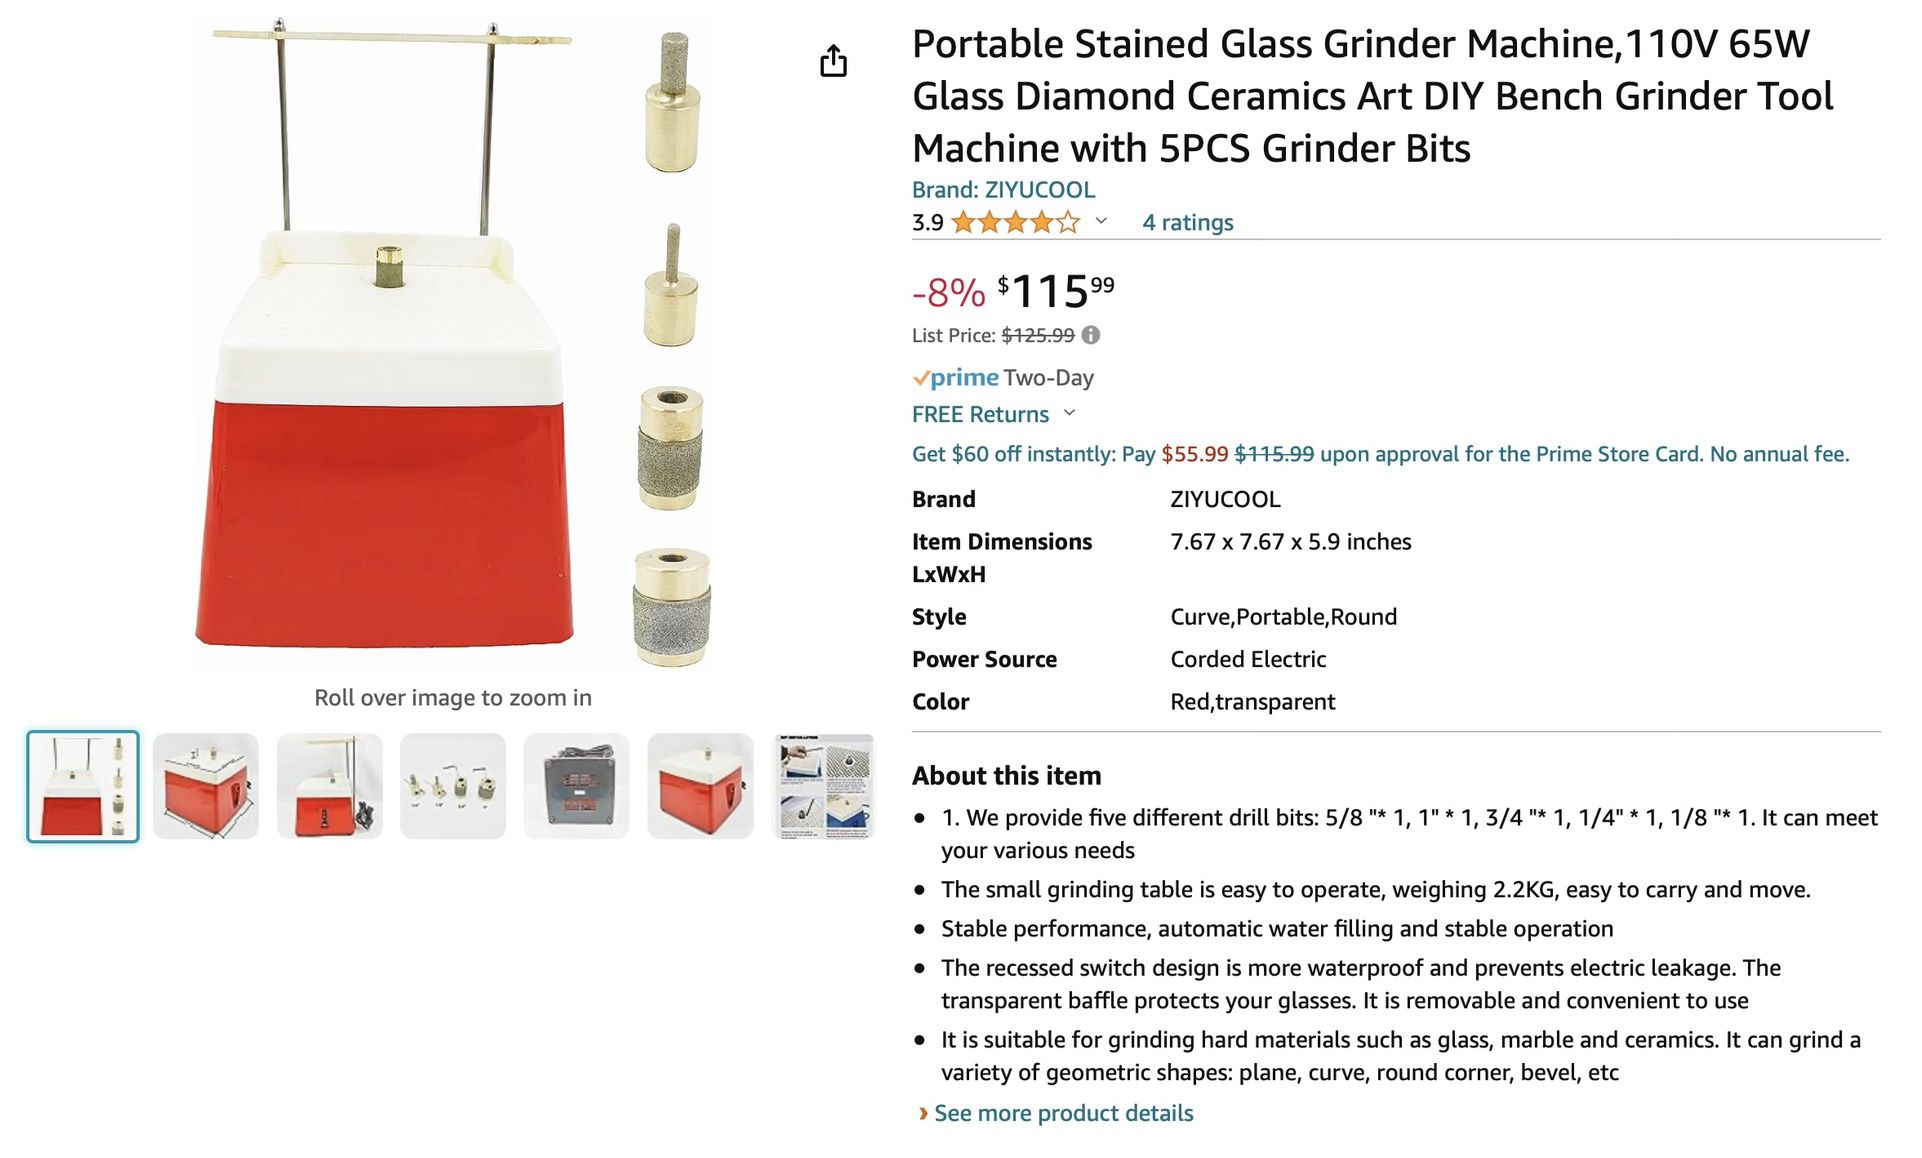 Portable Stained Glass Grinder Machine, 110V 65W Glass Diamond Ceramics Art  DIY Bench Grinder Tool Machine with 5PCS Grinder Bits for Sale in Long  Beach, CA - OfferUp